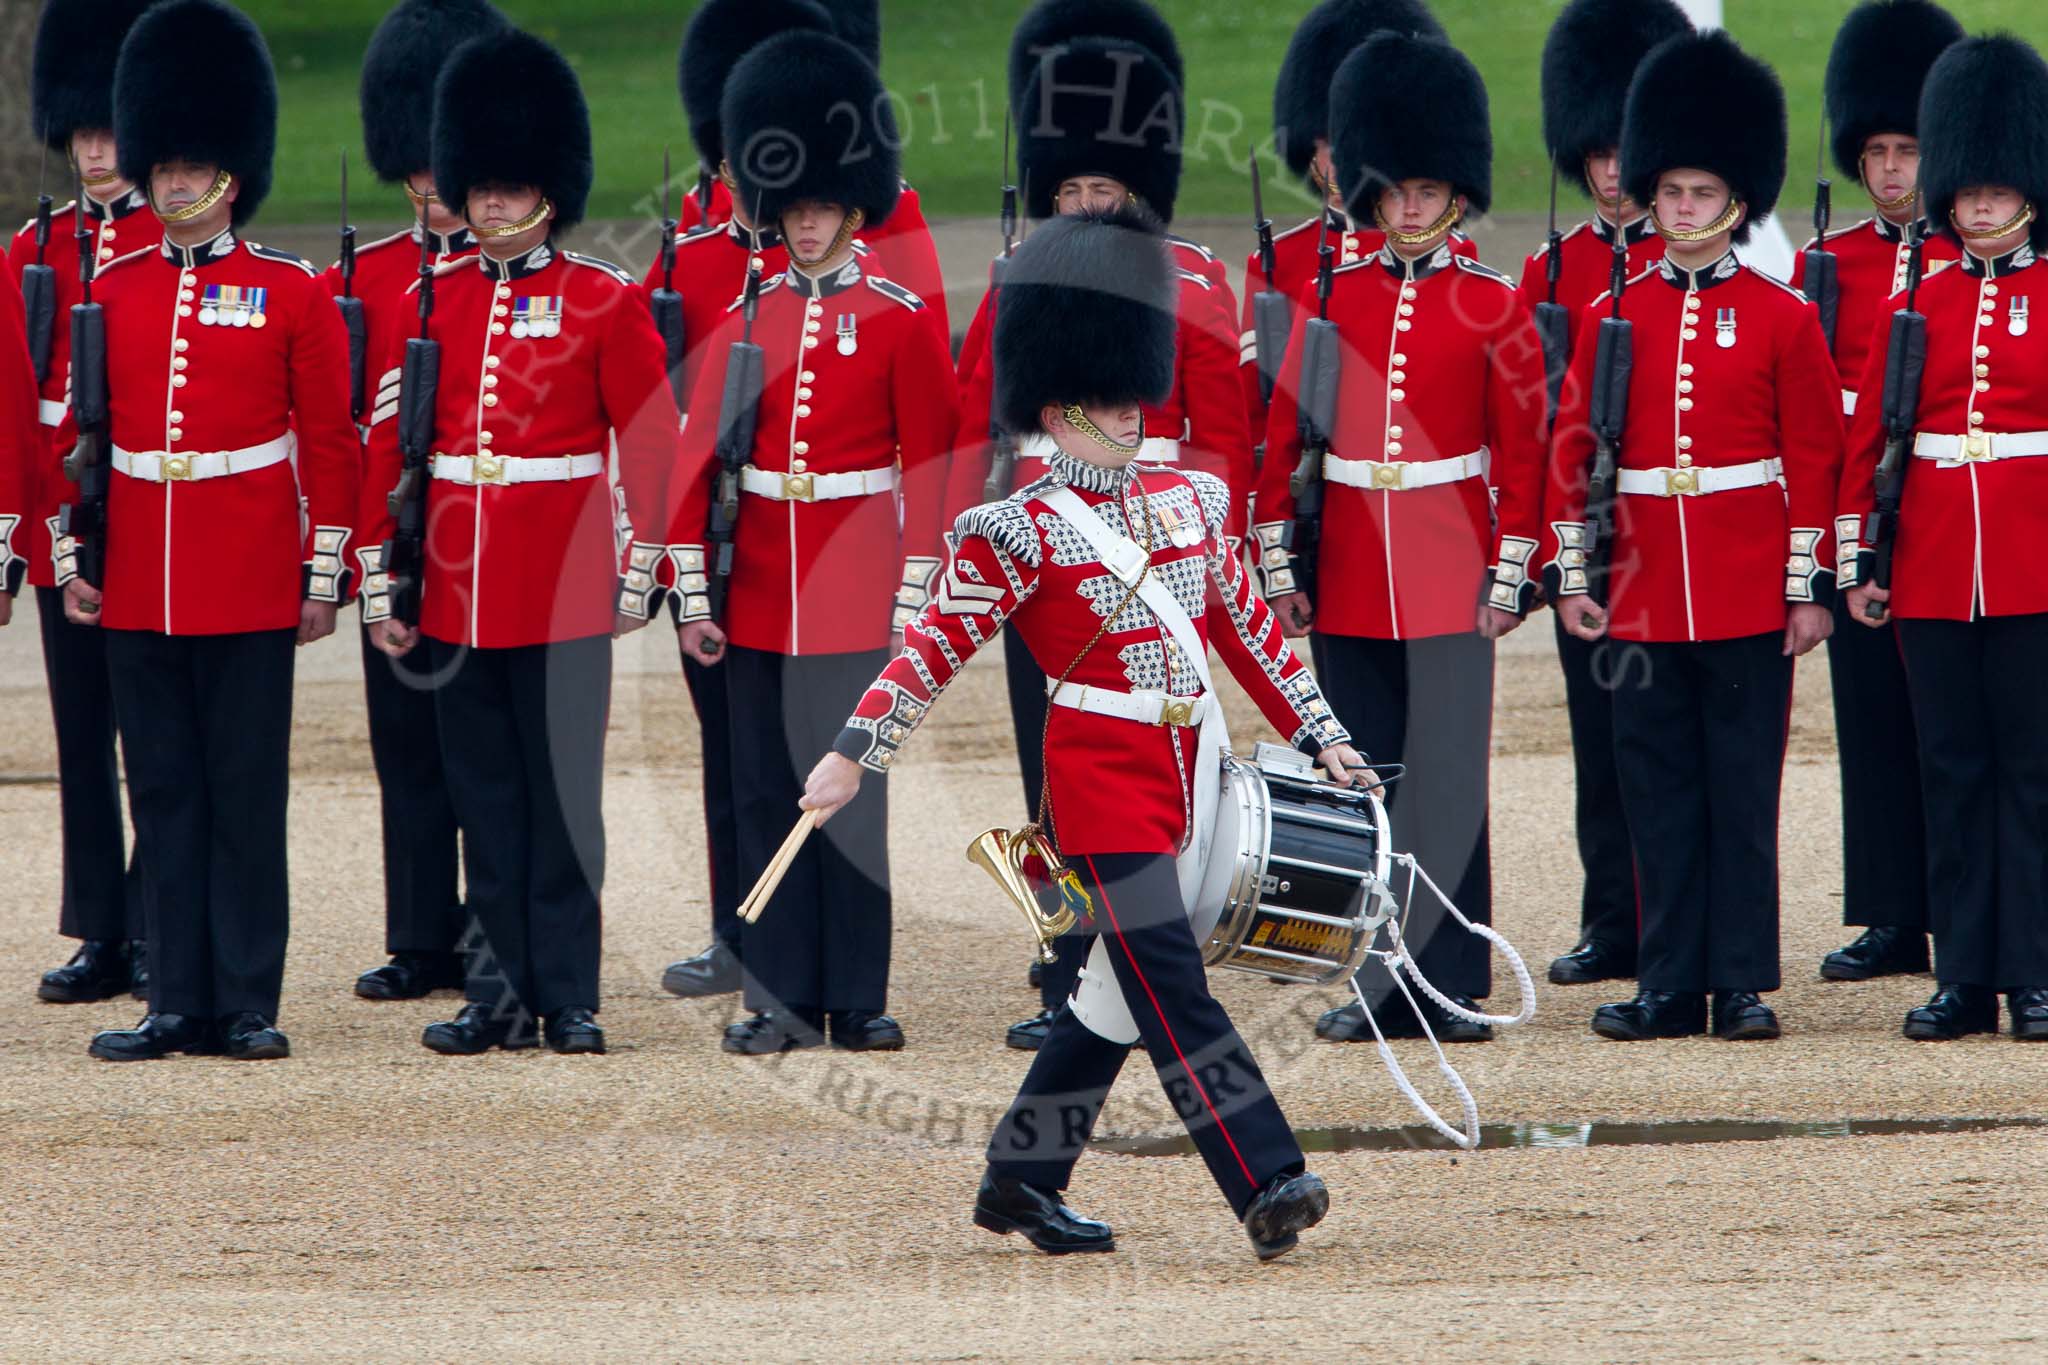 Trooping the Colour 2011: The Lone Drummer, Lance Corporal Gordon Prescott, has left the line, marching to a position at the right of the Escort to the Colour, where he will bear the 'drummers call', which will start the next phase of the parade..
Horse Guards Parade, Westminster,
London SW1,
Greater London,
United Kingdom,
on 11 June 2011 at 11:16, image #196